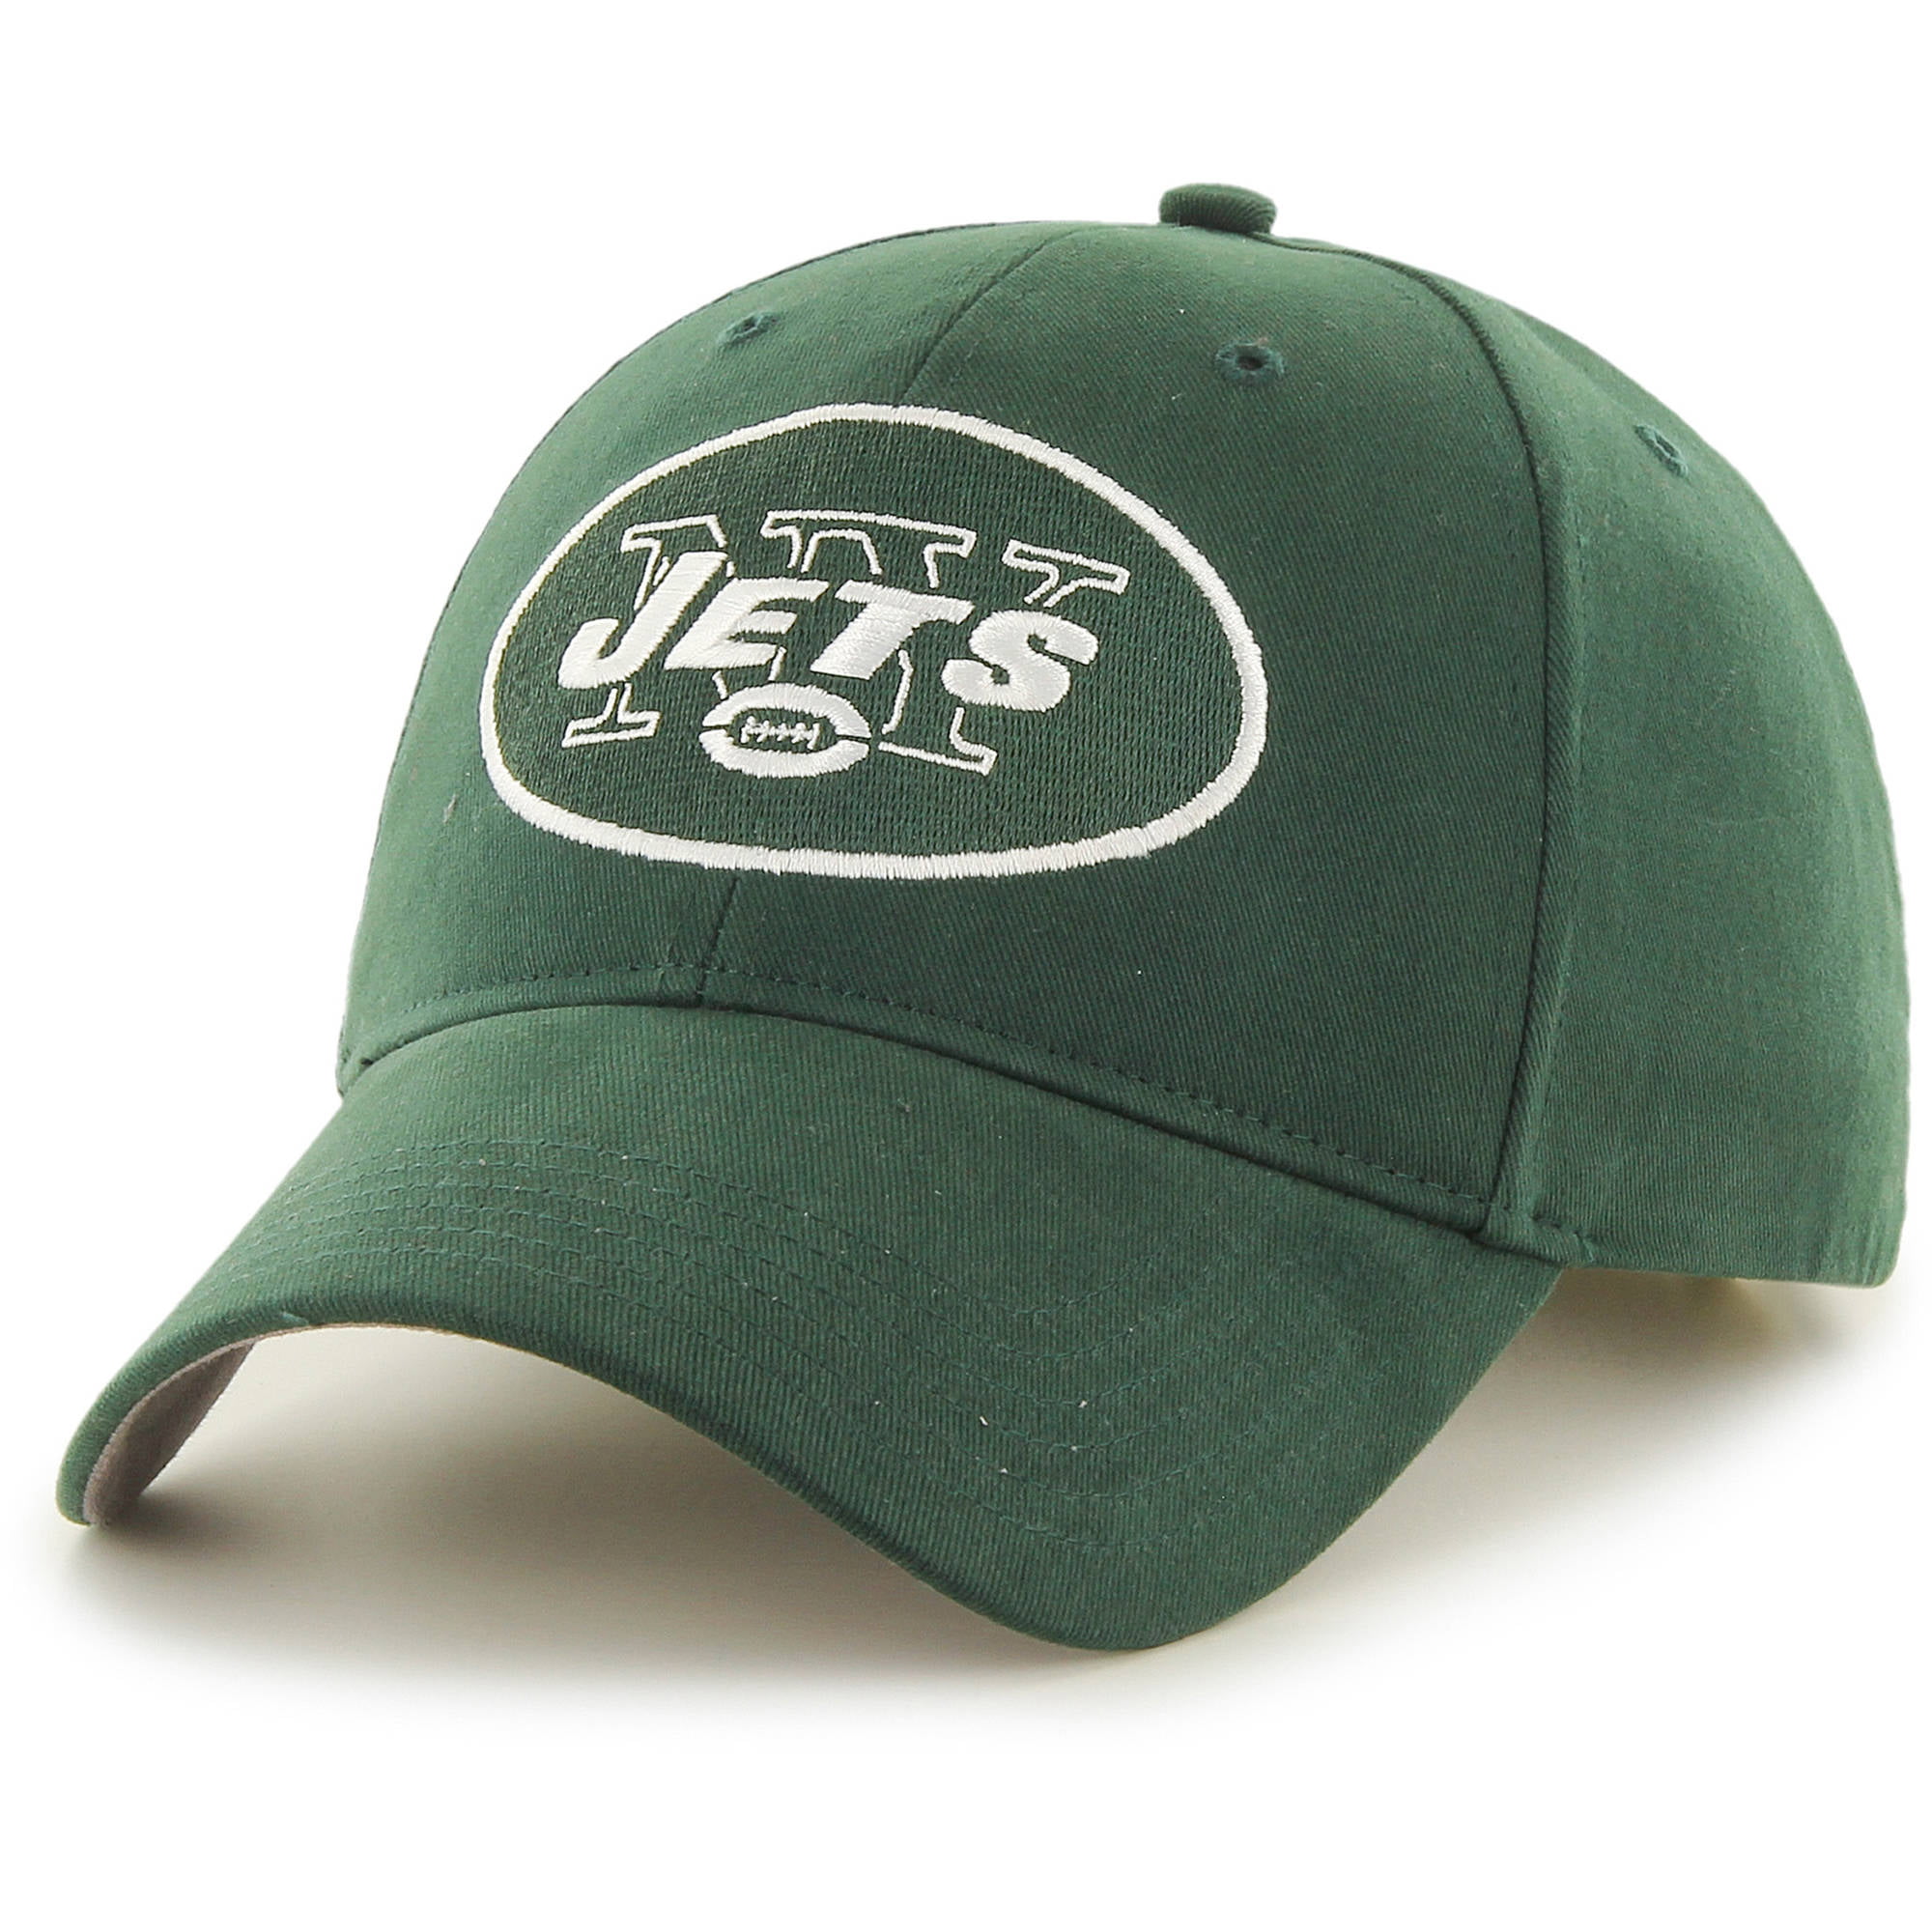 New York Jets Hats in New York Jets Team Shop 